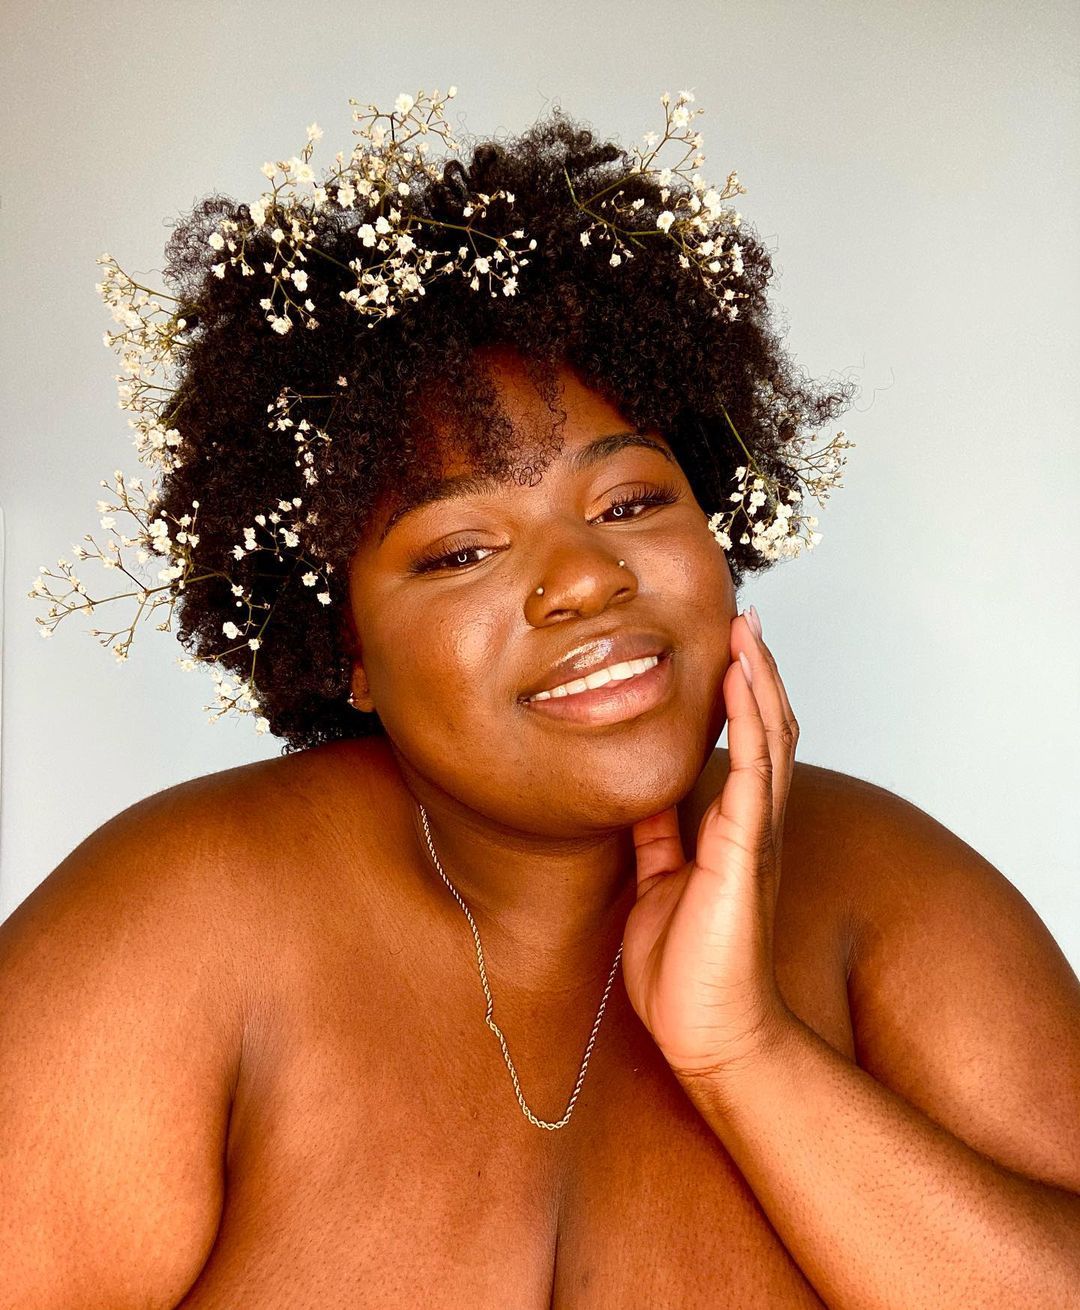 The Black Plus Size Models Revitalizing the Plus Size Fashion Space in 2021